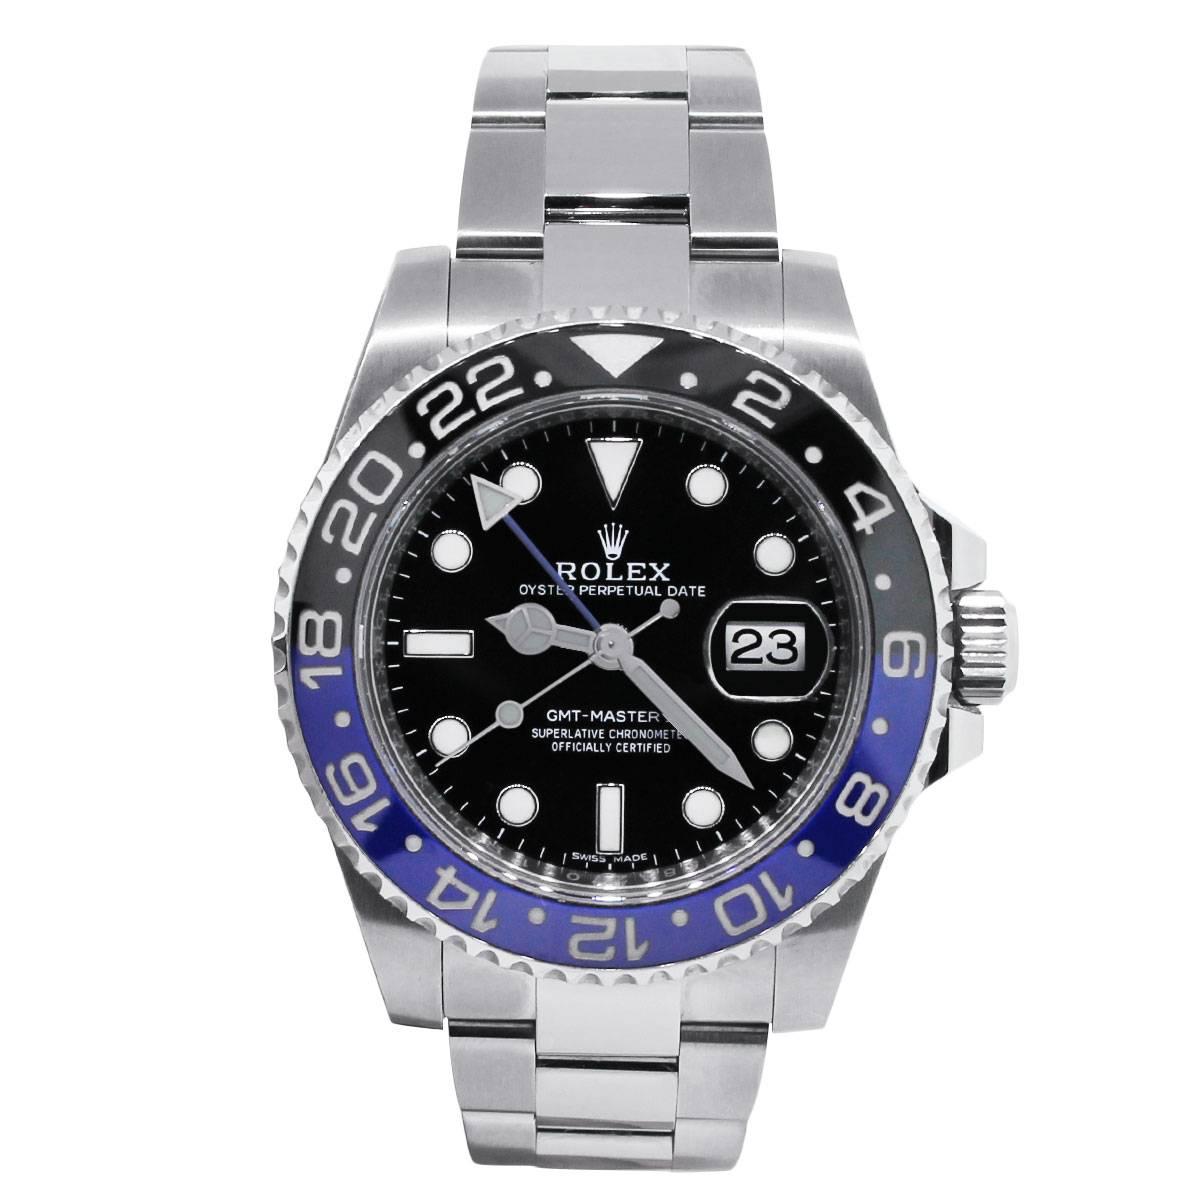 Brand: Rolex
MPN: GMT Master II
Model: 116170
 Case Material: Stainless Steel
Case Diameter: 40 mm
Crystal: Scratch resistant sapphire crystal
Bezel: Stainless steel black and blue bidirectional rotating ceramic bezel with GMT markers
Dial: Black